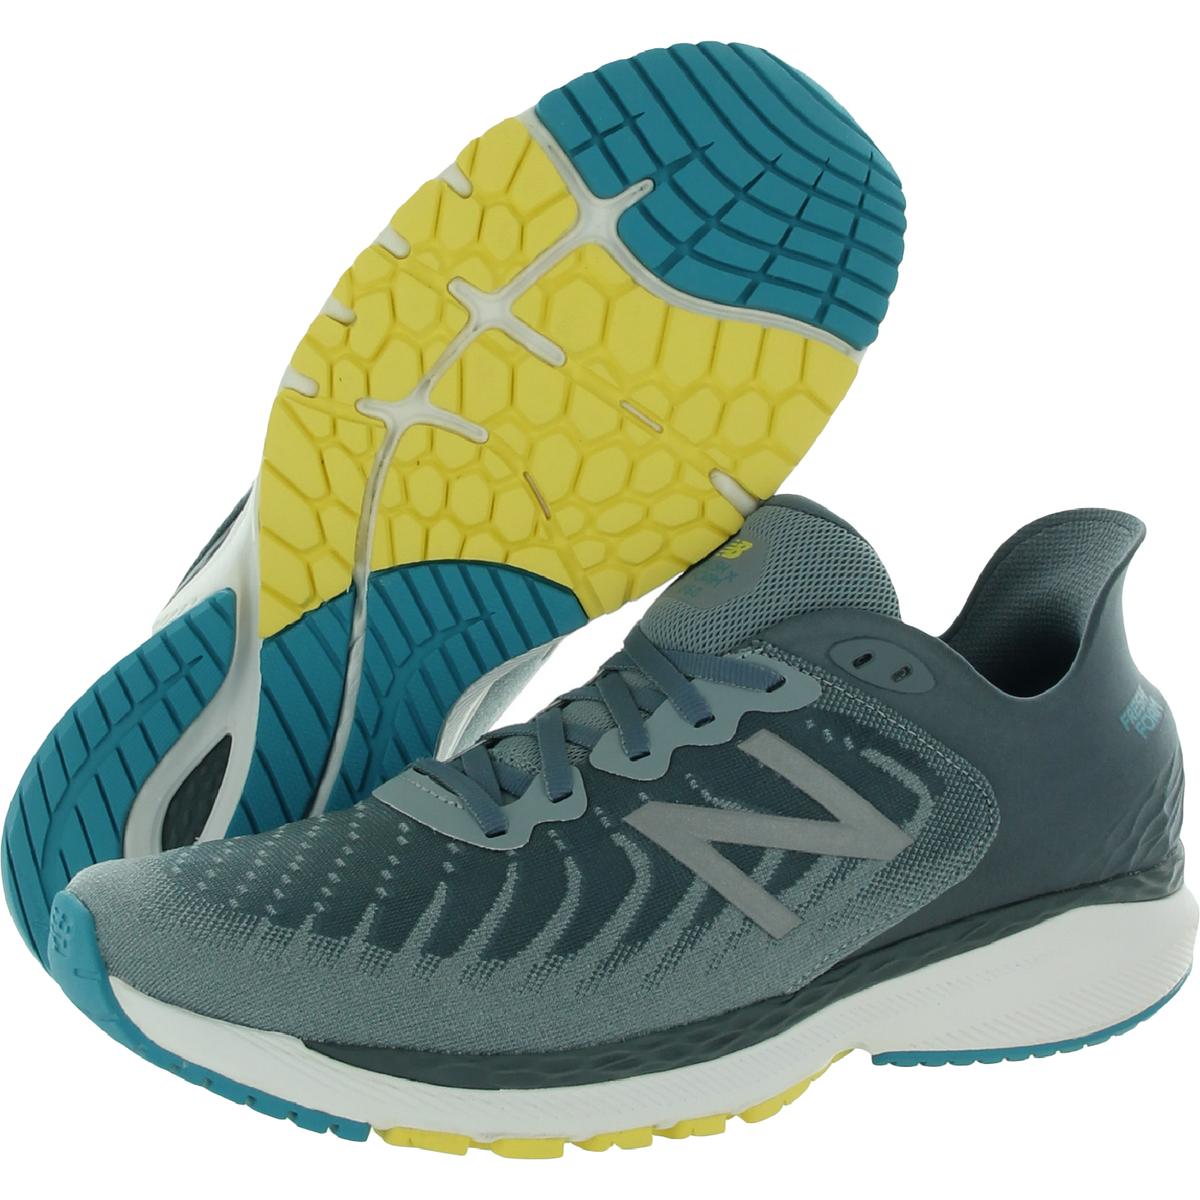 New Balance Fresh Foam 860 v11 Mens Lace Up Fitness Running Shoes